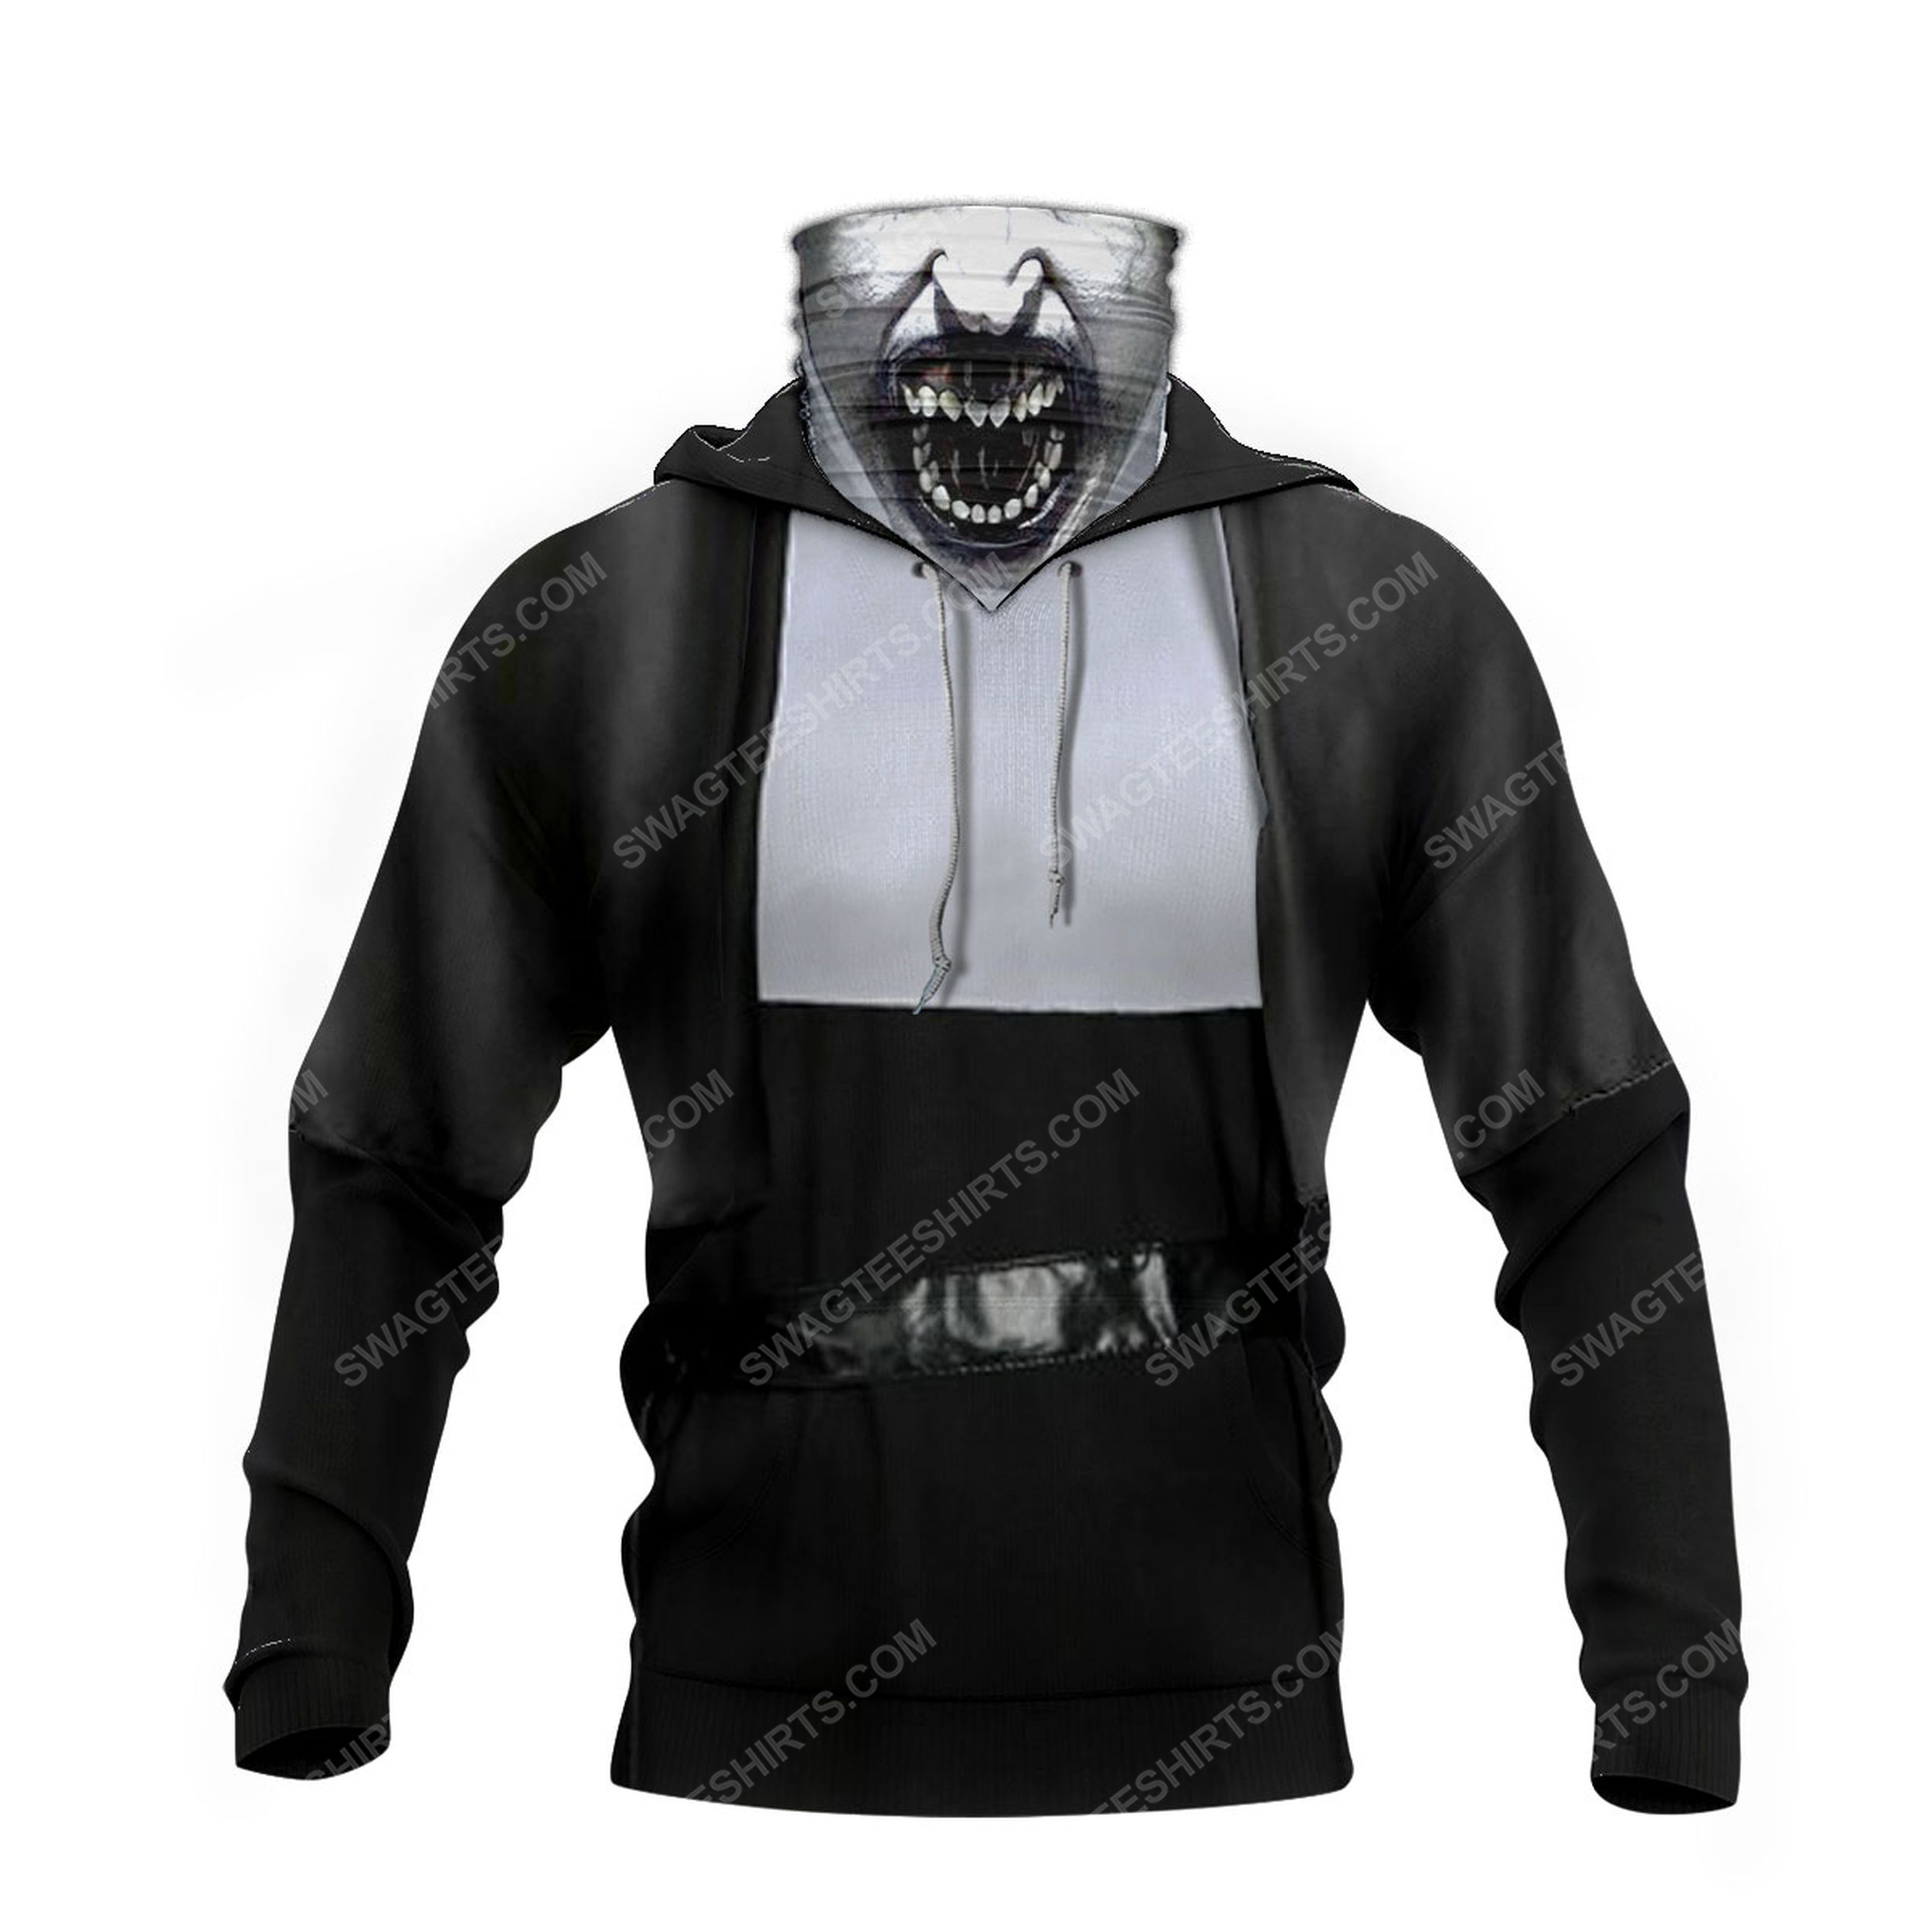 The conjuring horror movie for halloween full print mask hoodie 4(1)